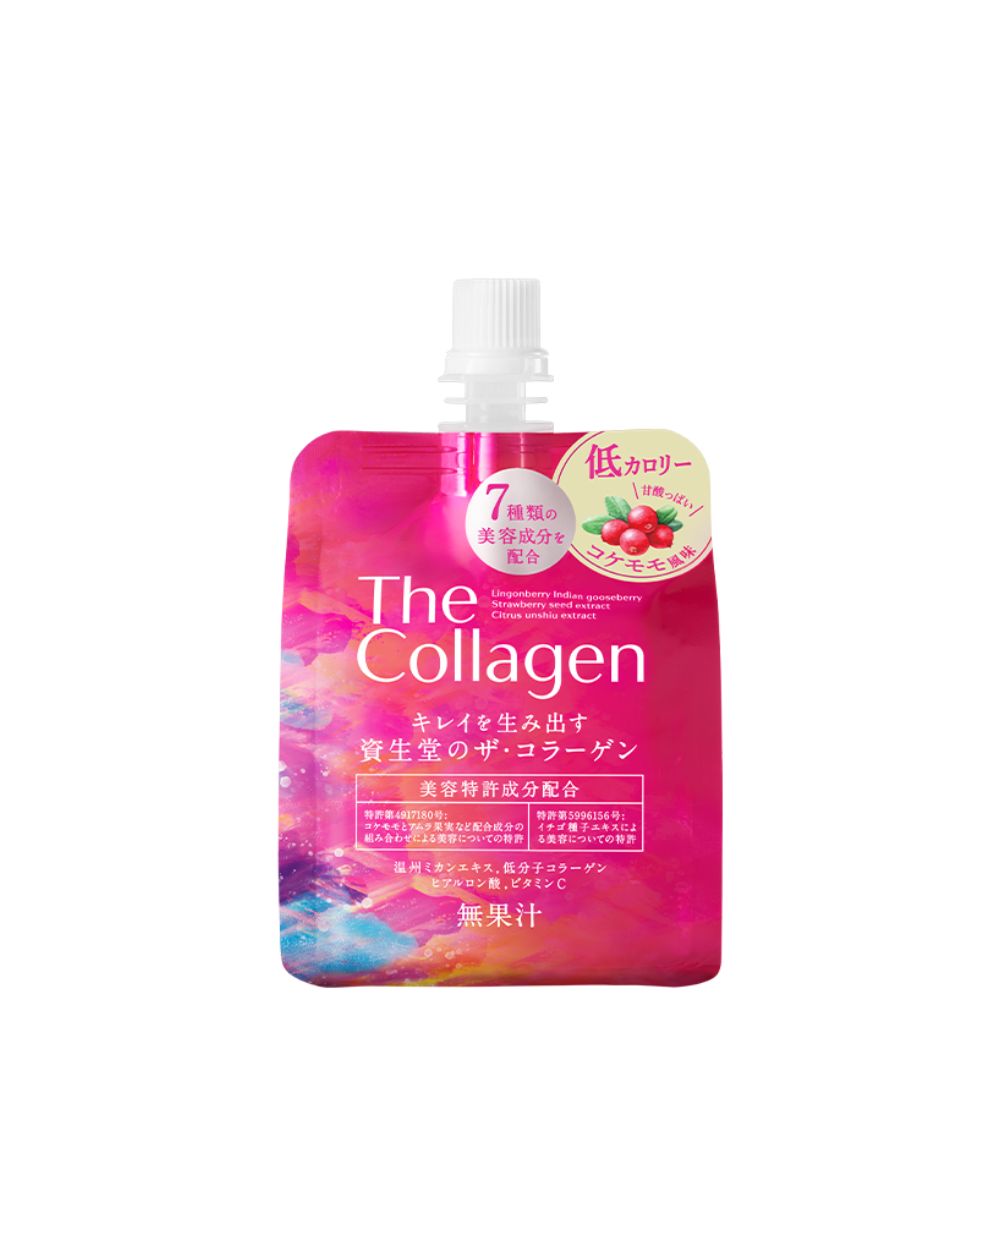 FREE GIFT | Shiseido - The Collagen Jelly